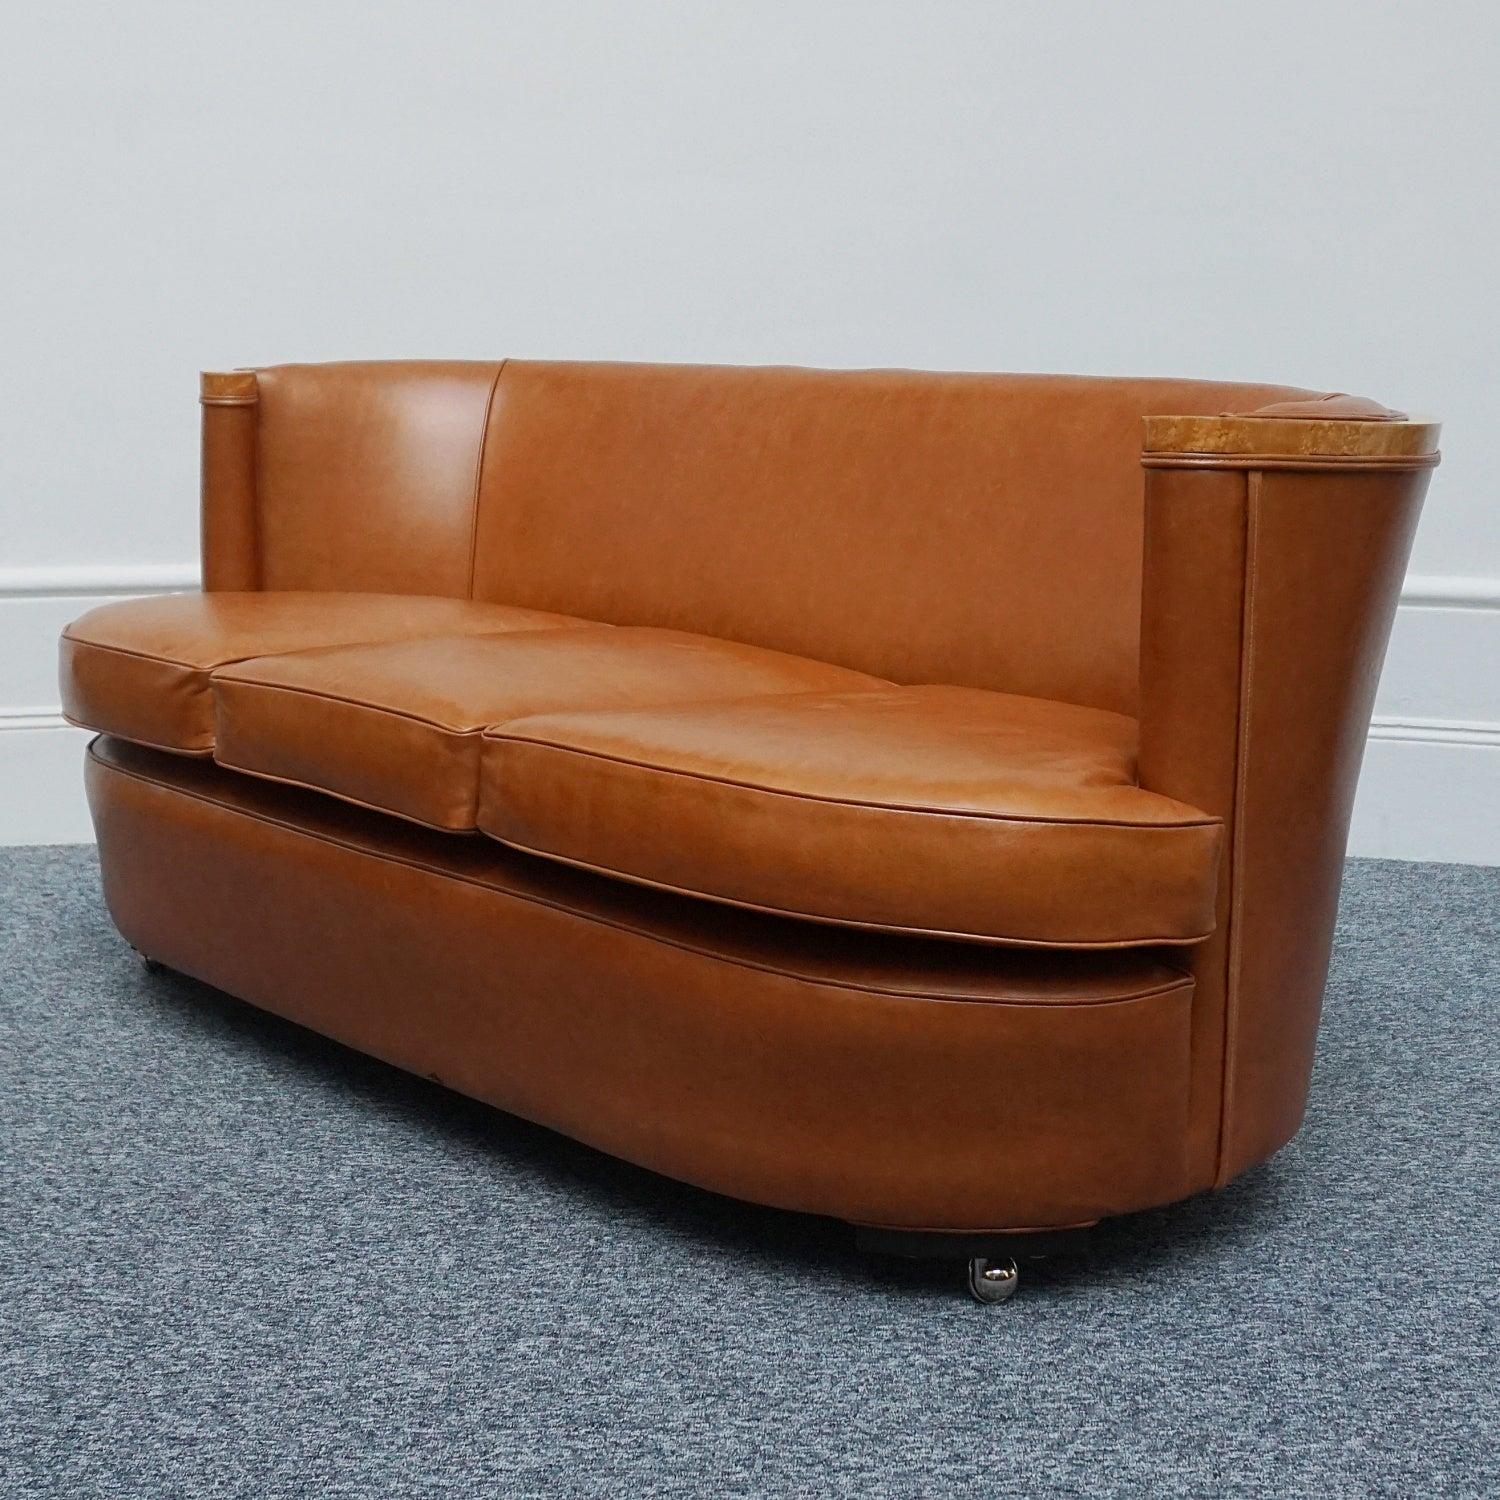 An Art Deco three seater Club Sofa by Maurice Adams with Birdseye maple veneered banding and brown leather re-upholstery. 

Dimensions: H 76cm W 170cm D 93cm Seat H 48cm W 155cm D 65cm. 

Origin: English

Date: Circa 1930

The self